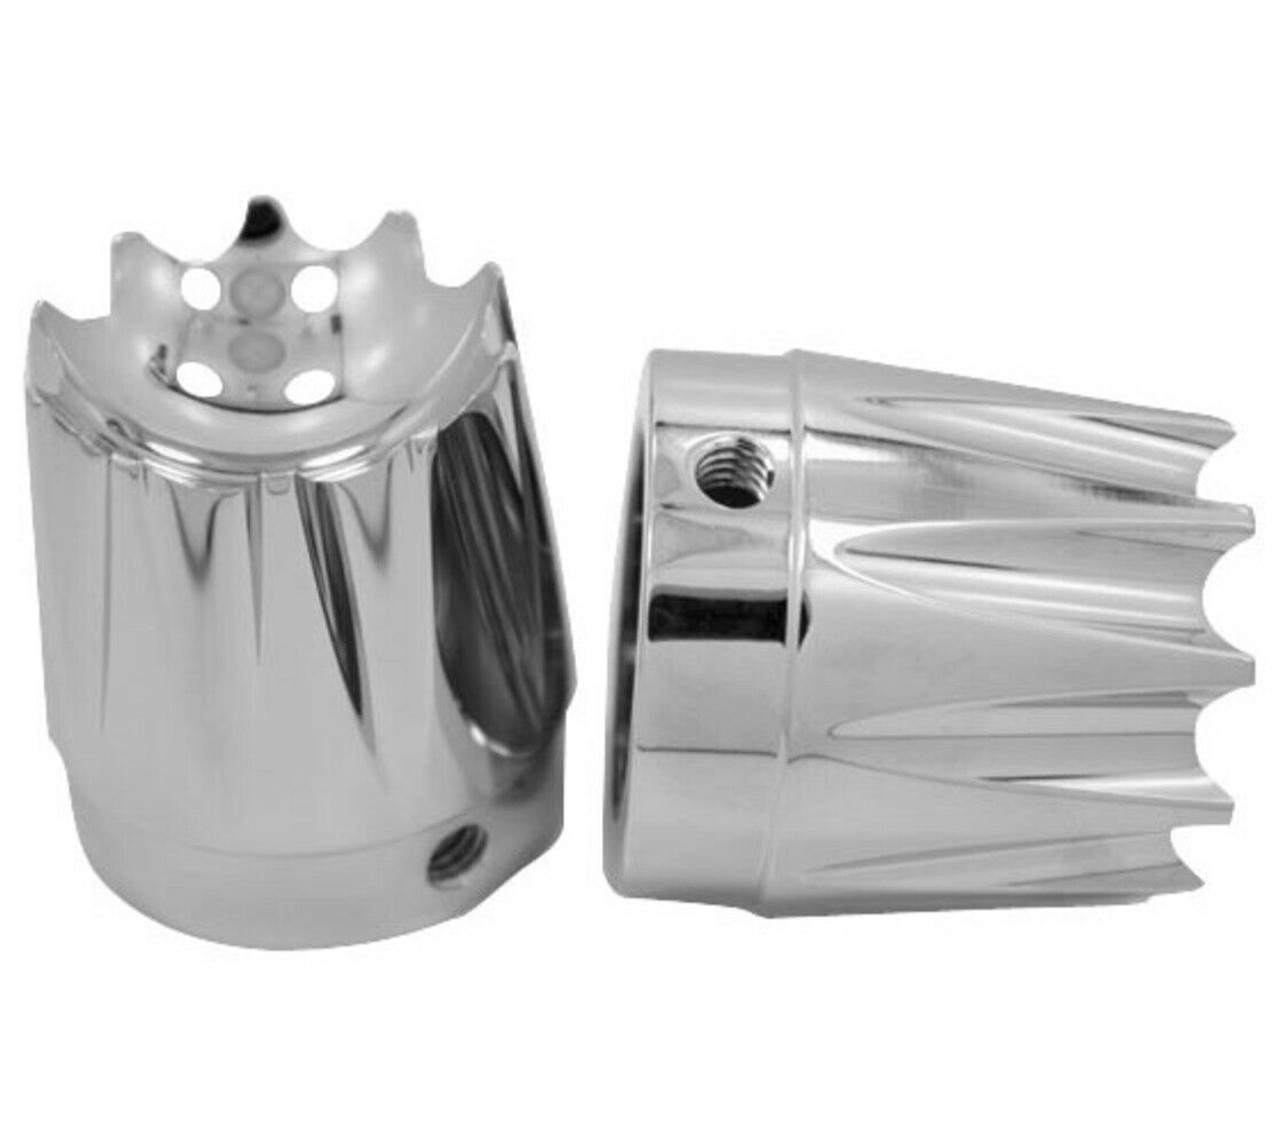 Avon Grips Excalibur Axle Nut Covers - 1in. - Chrome